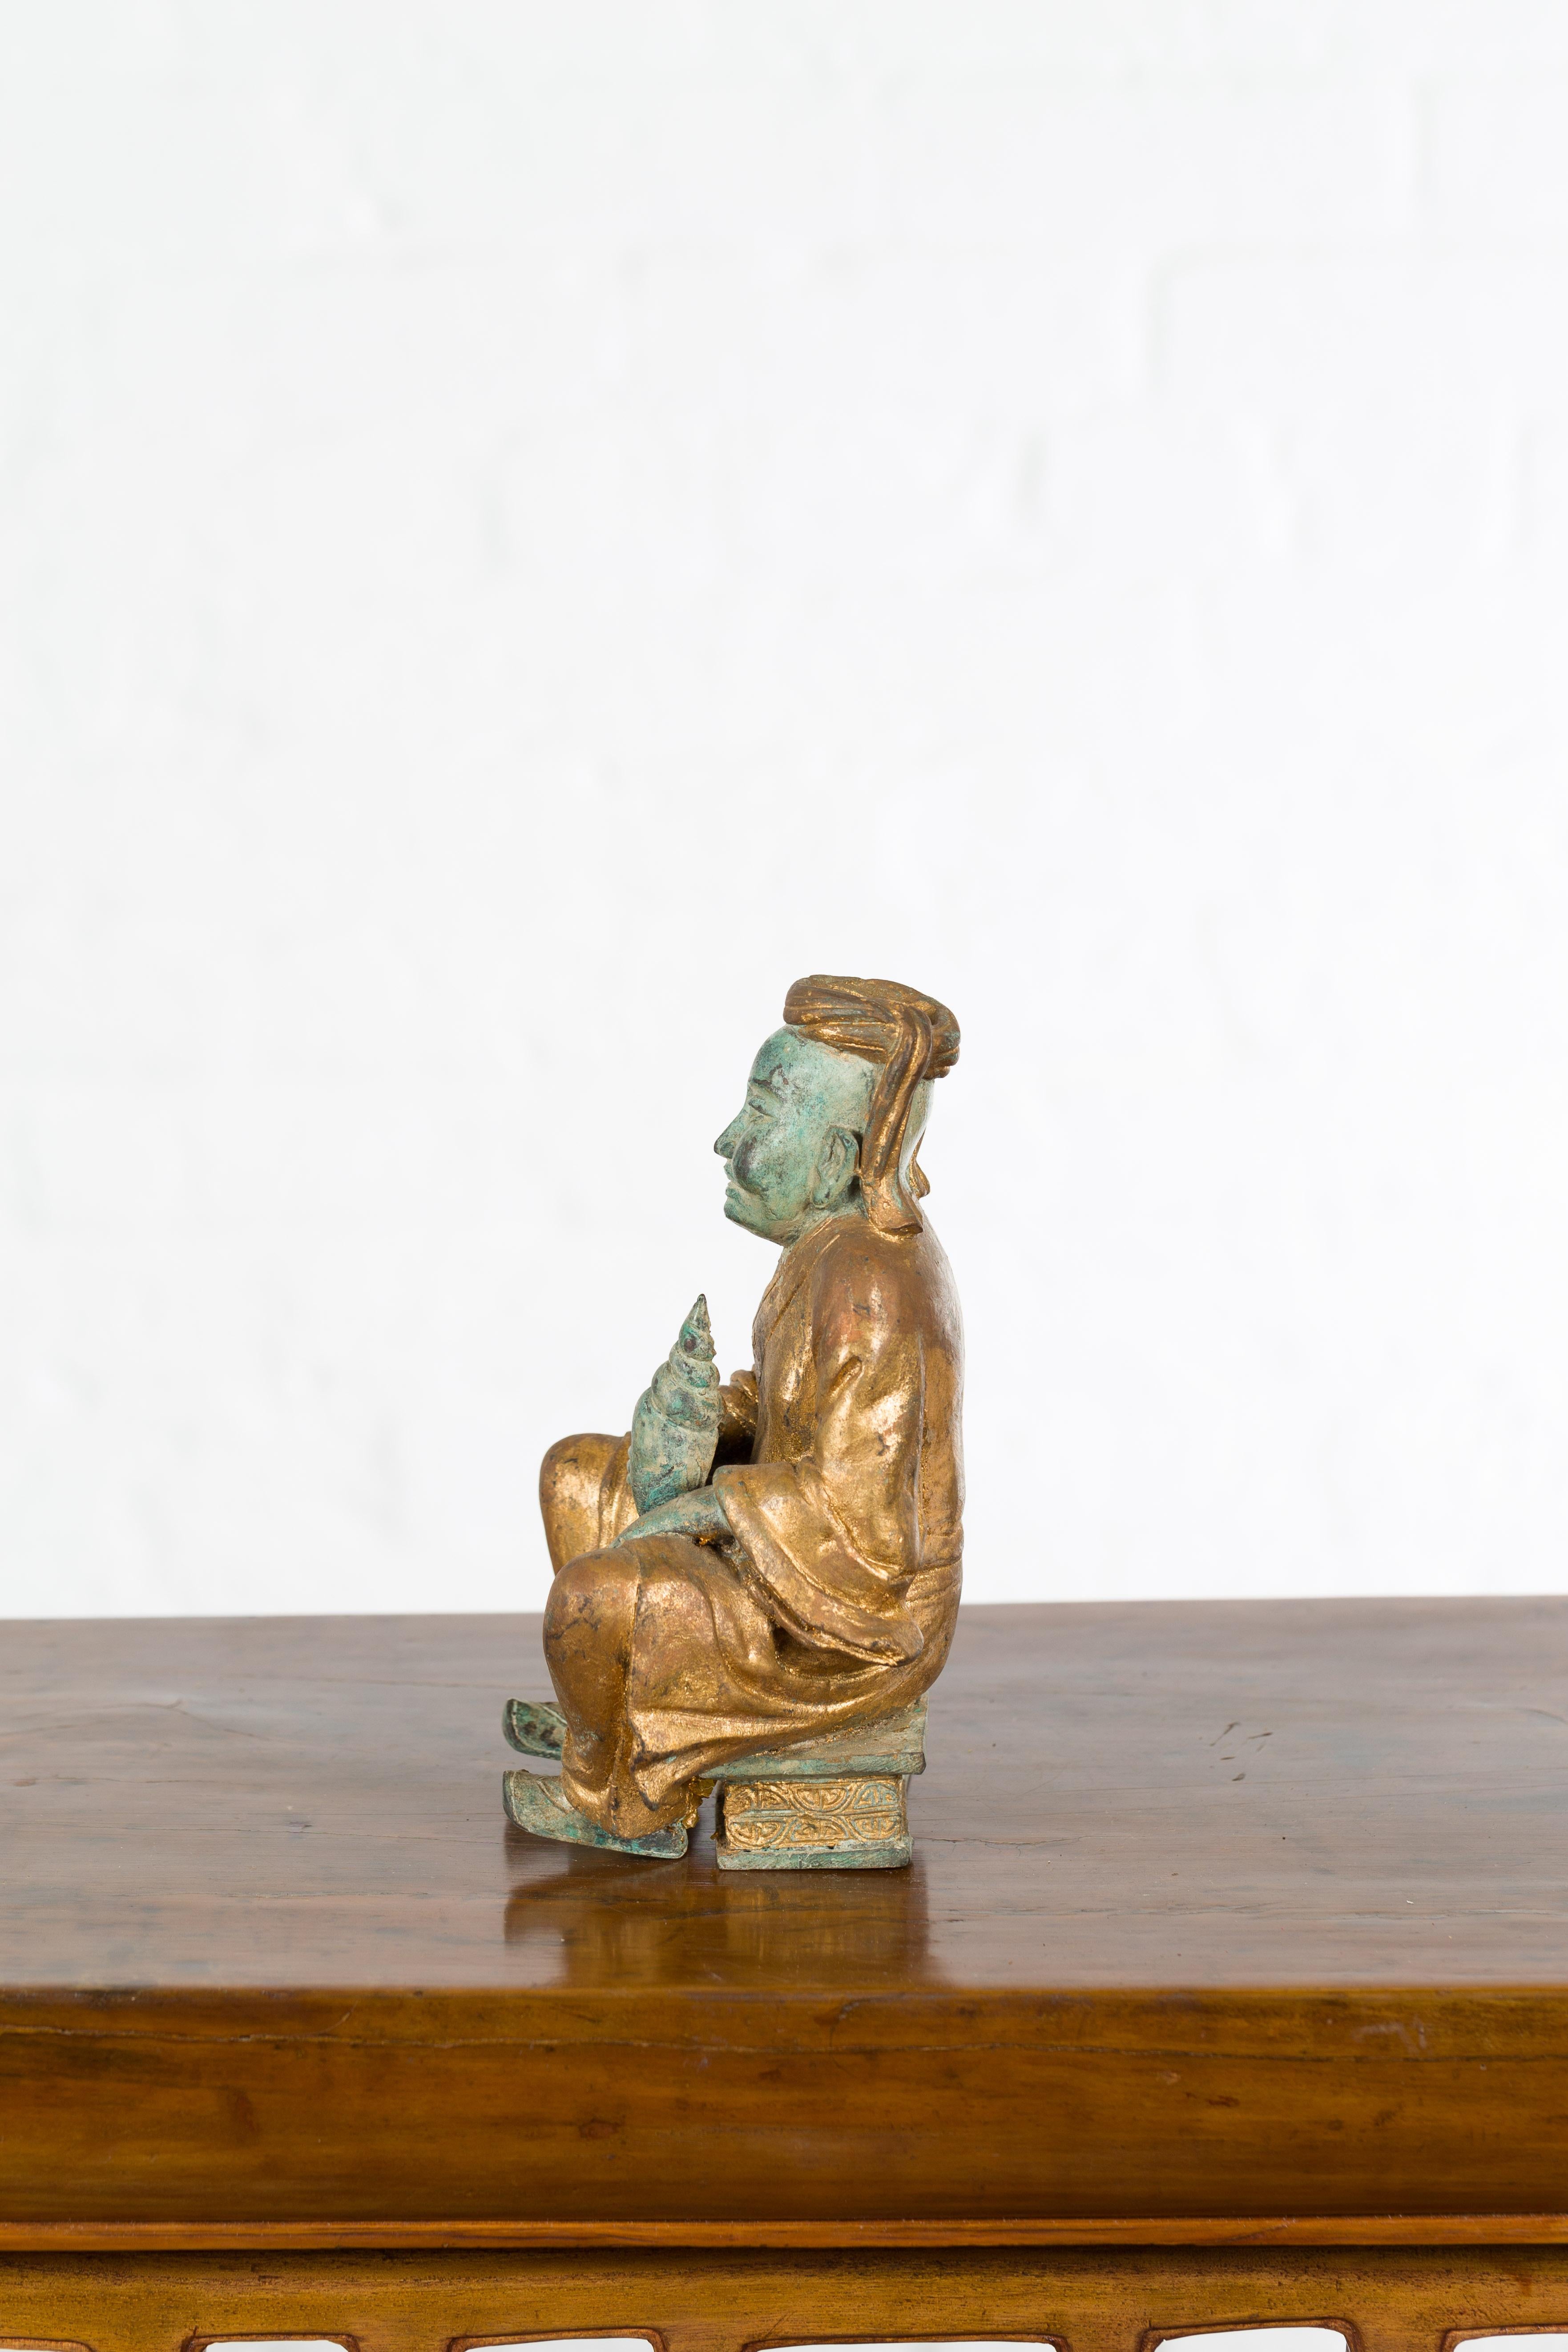 Petite Thai Verde and Gilded Statuette of a Seated Monk Holding a Conch Shell 4